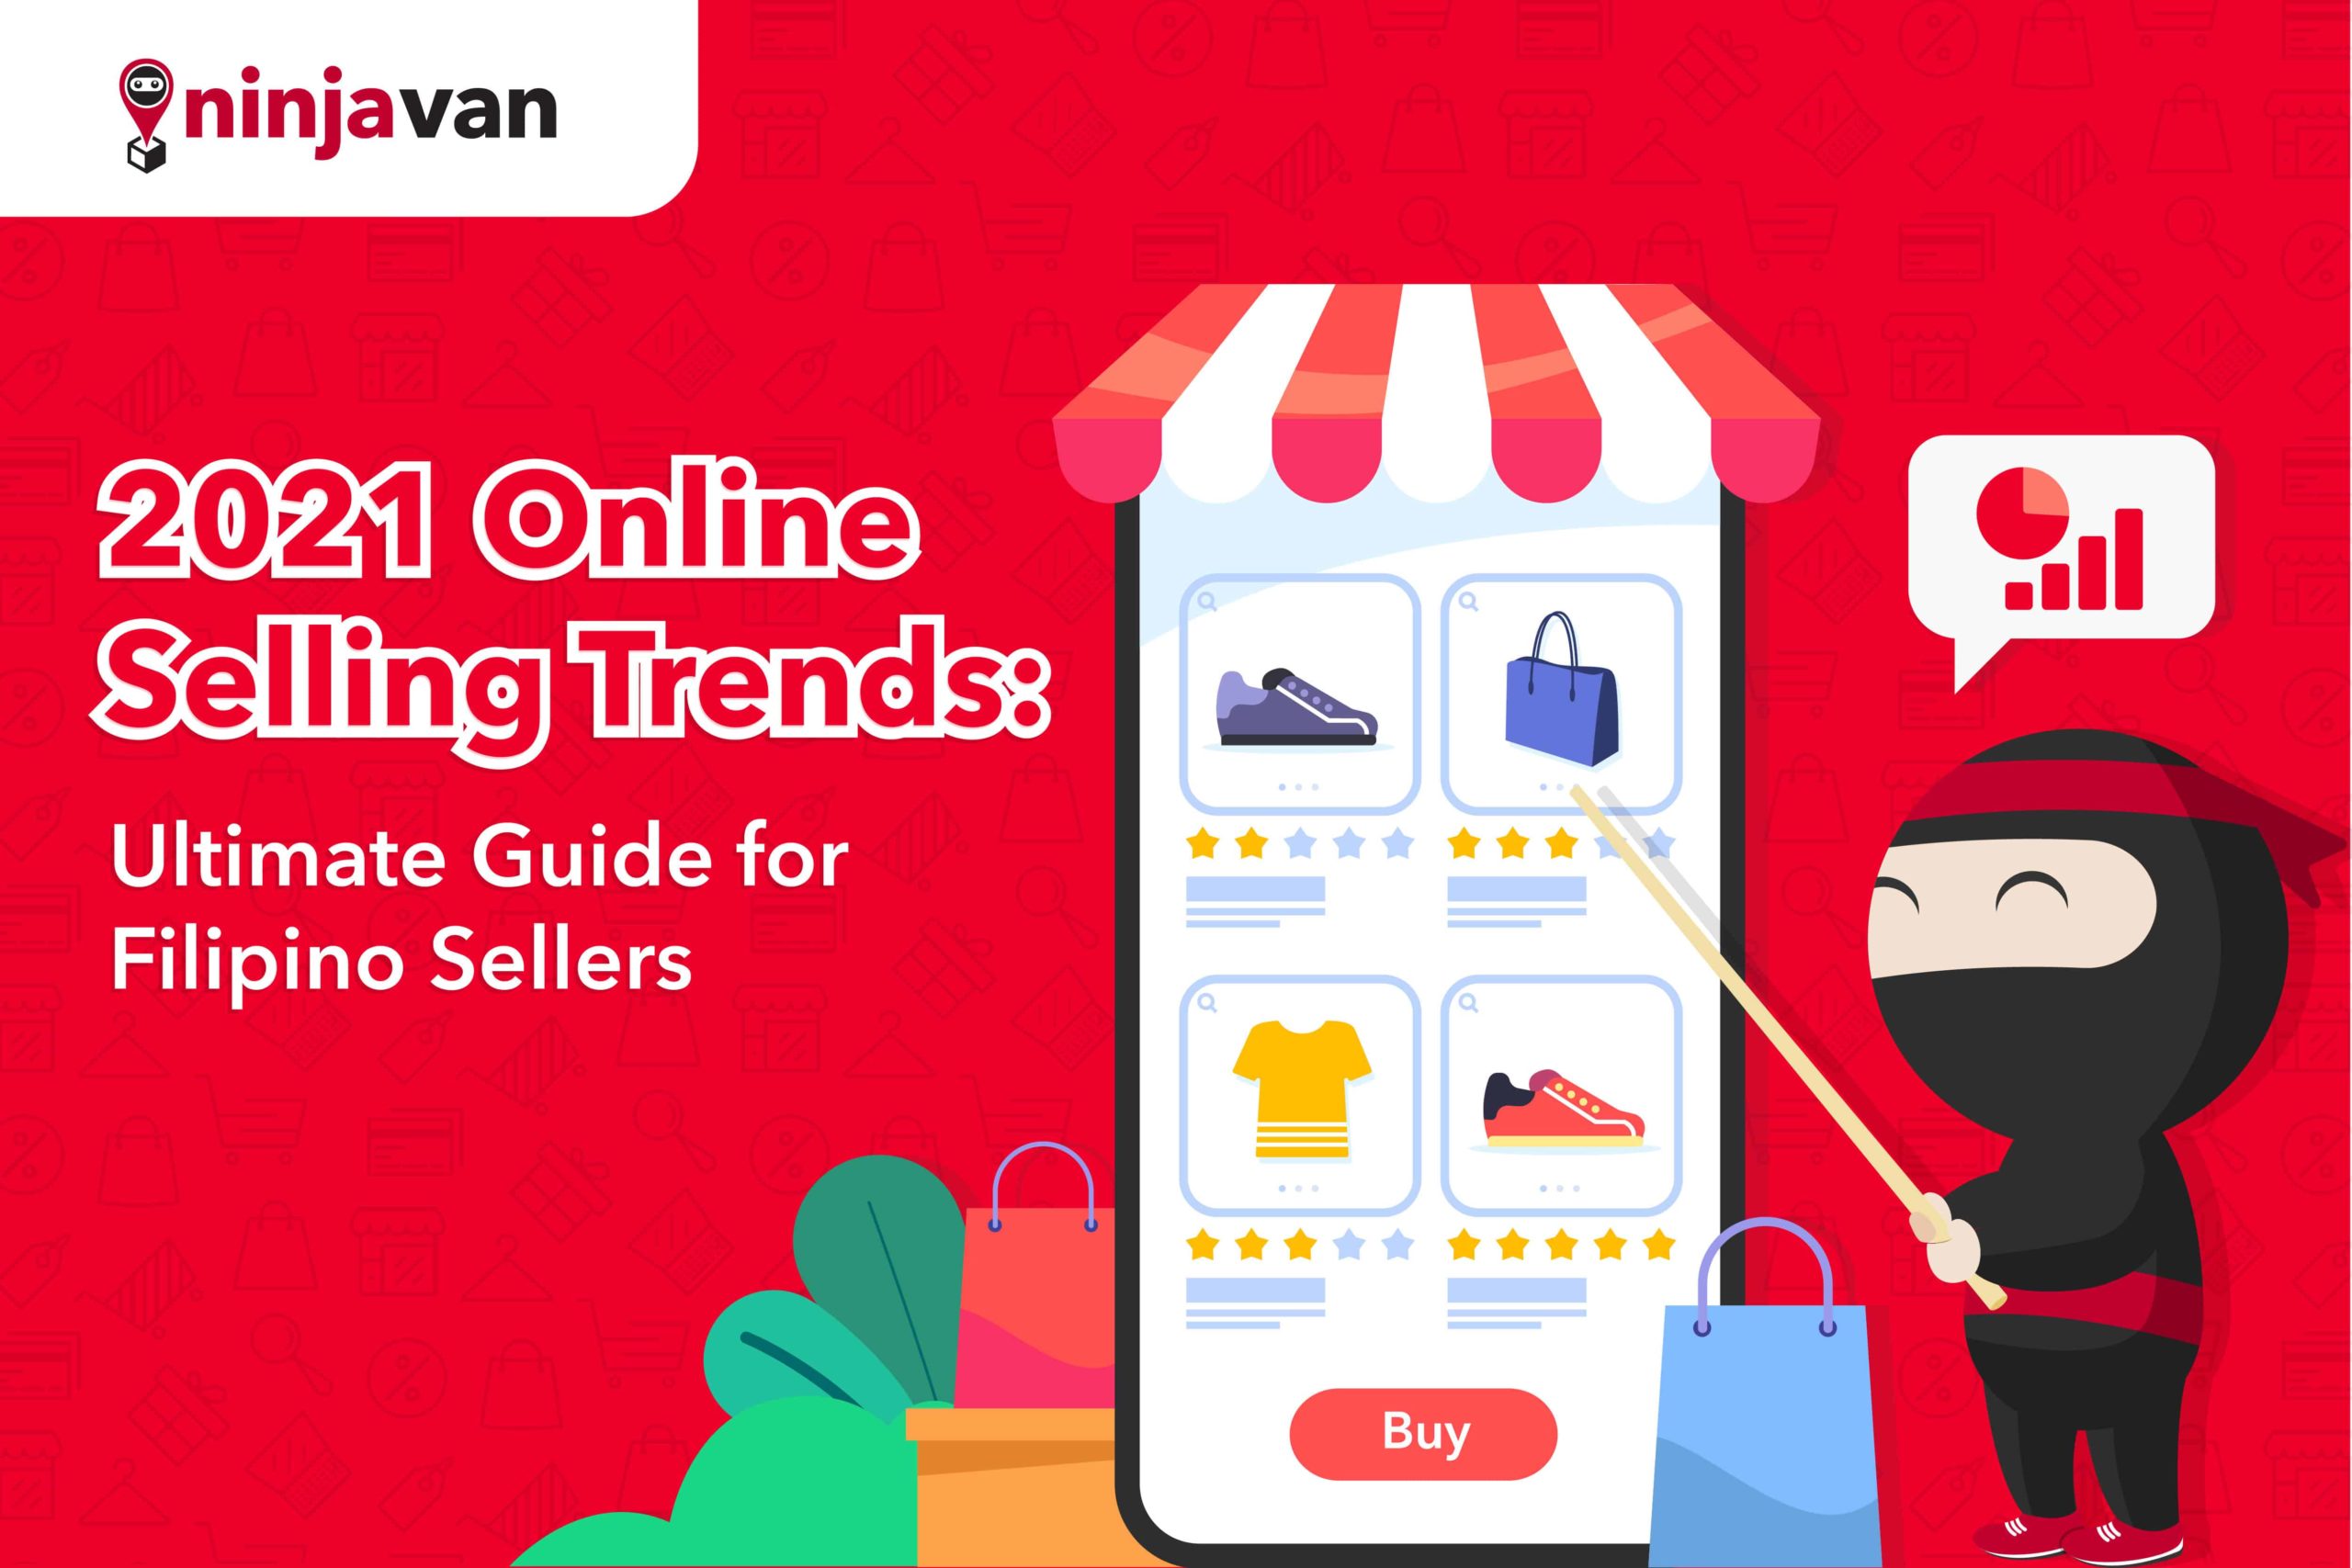 2021 Online Selling Trends